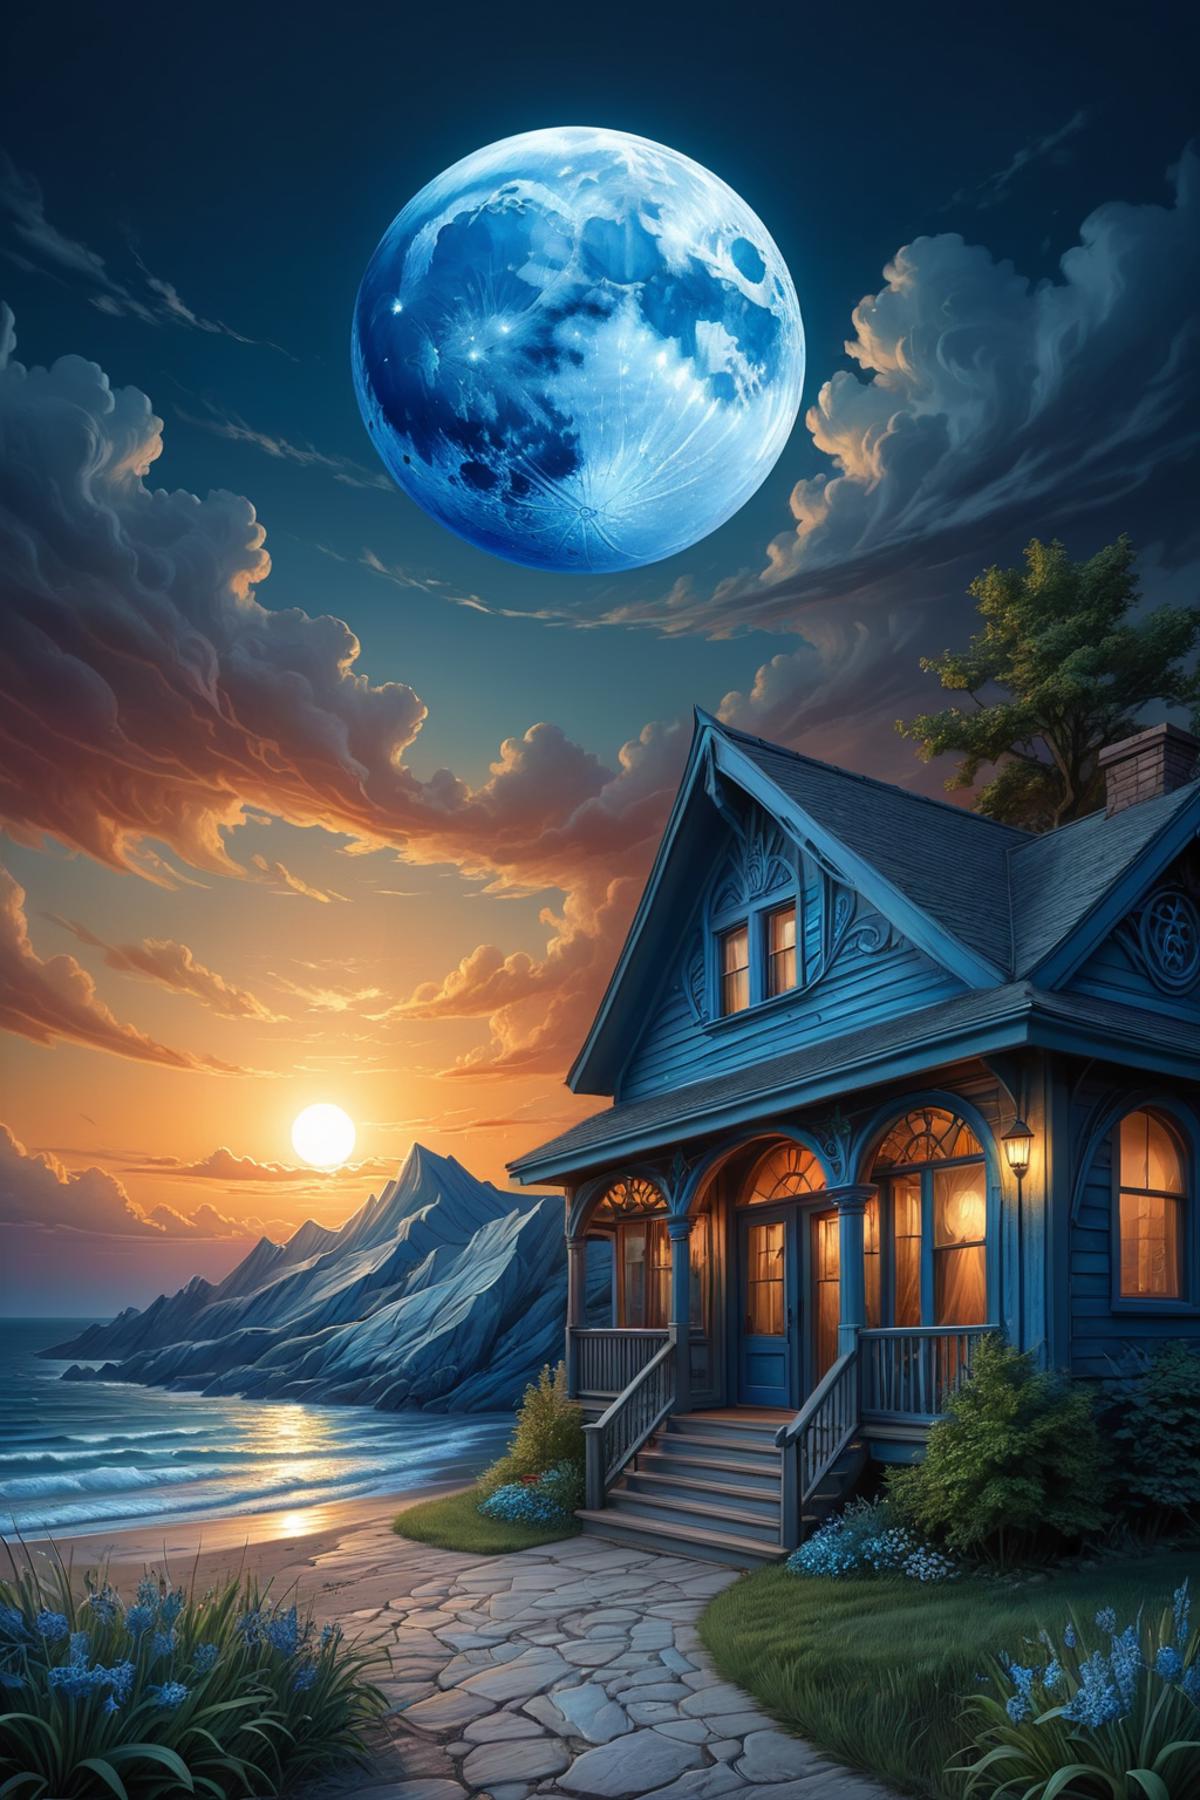 A house by the ocean with the moon in the background and a beautiful sunset.